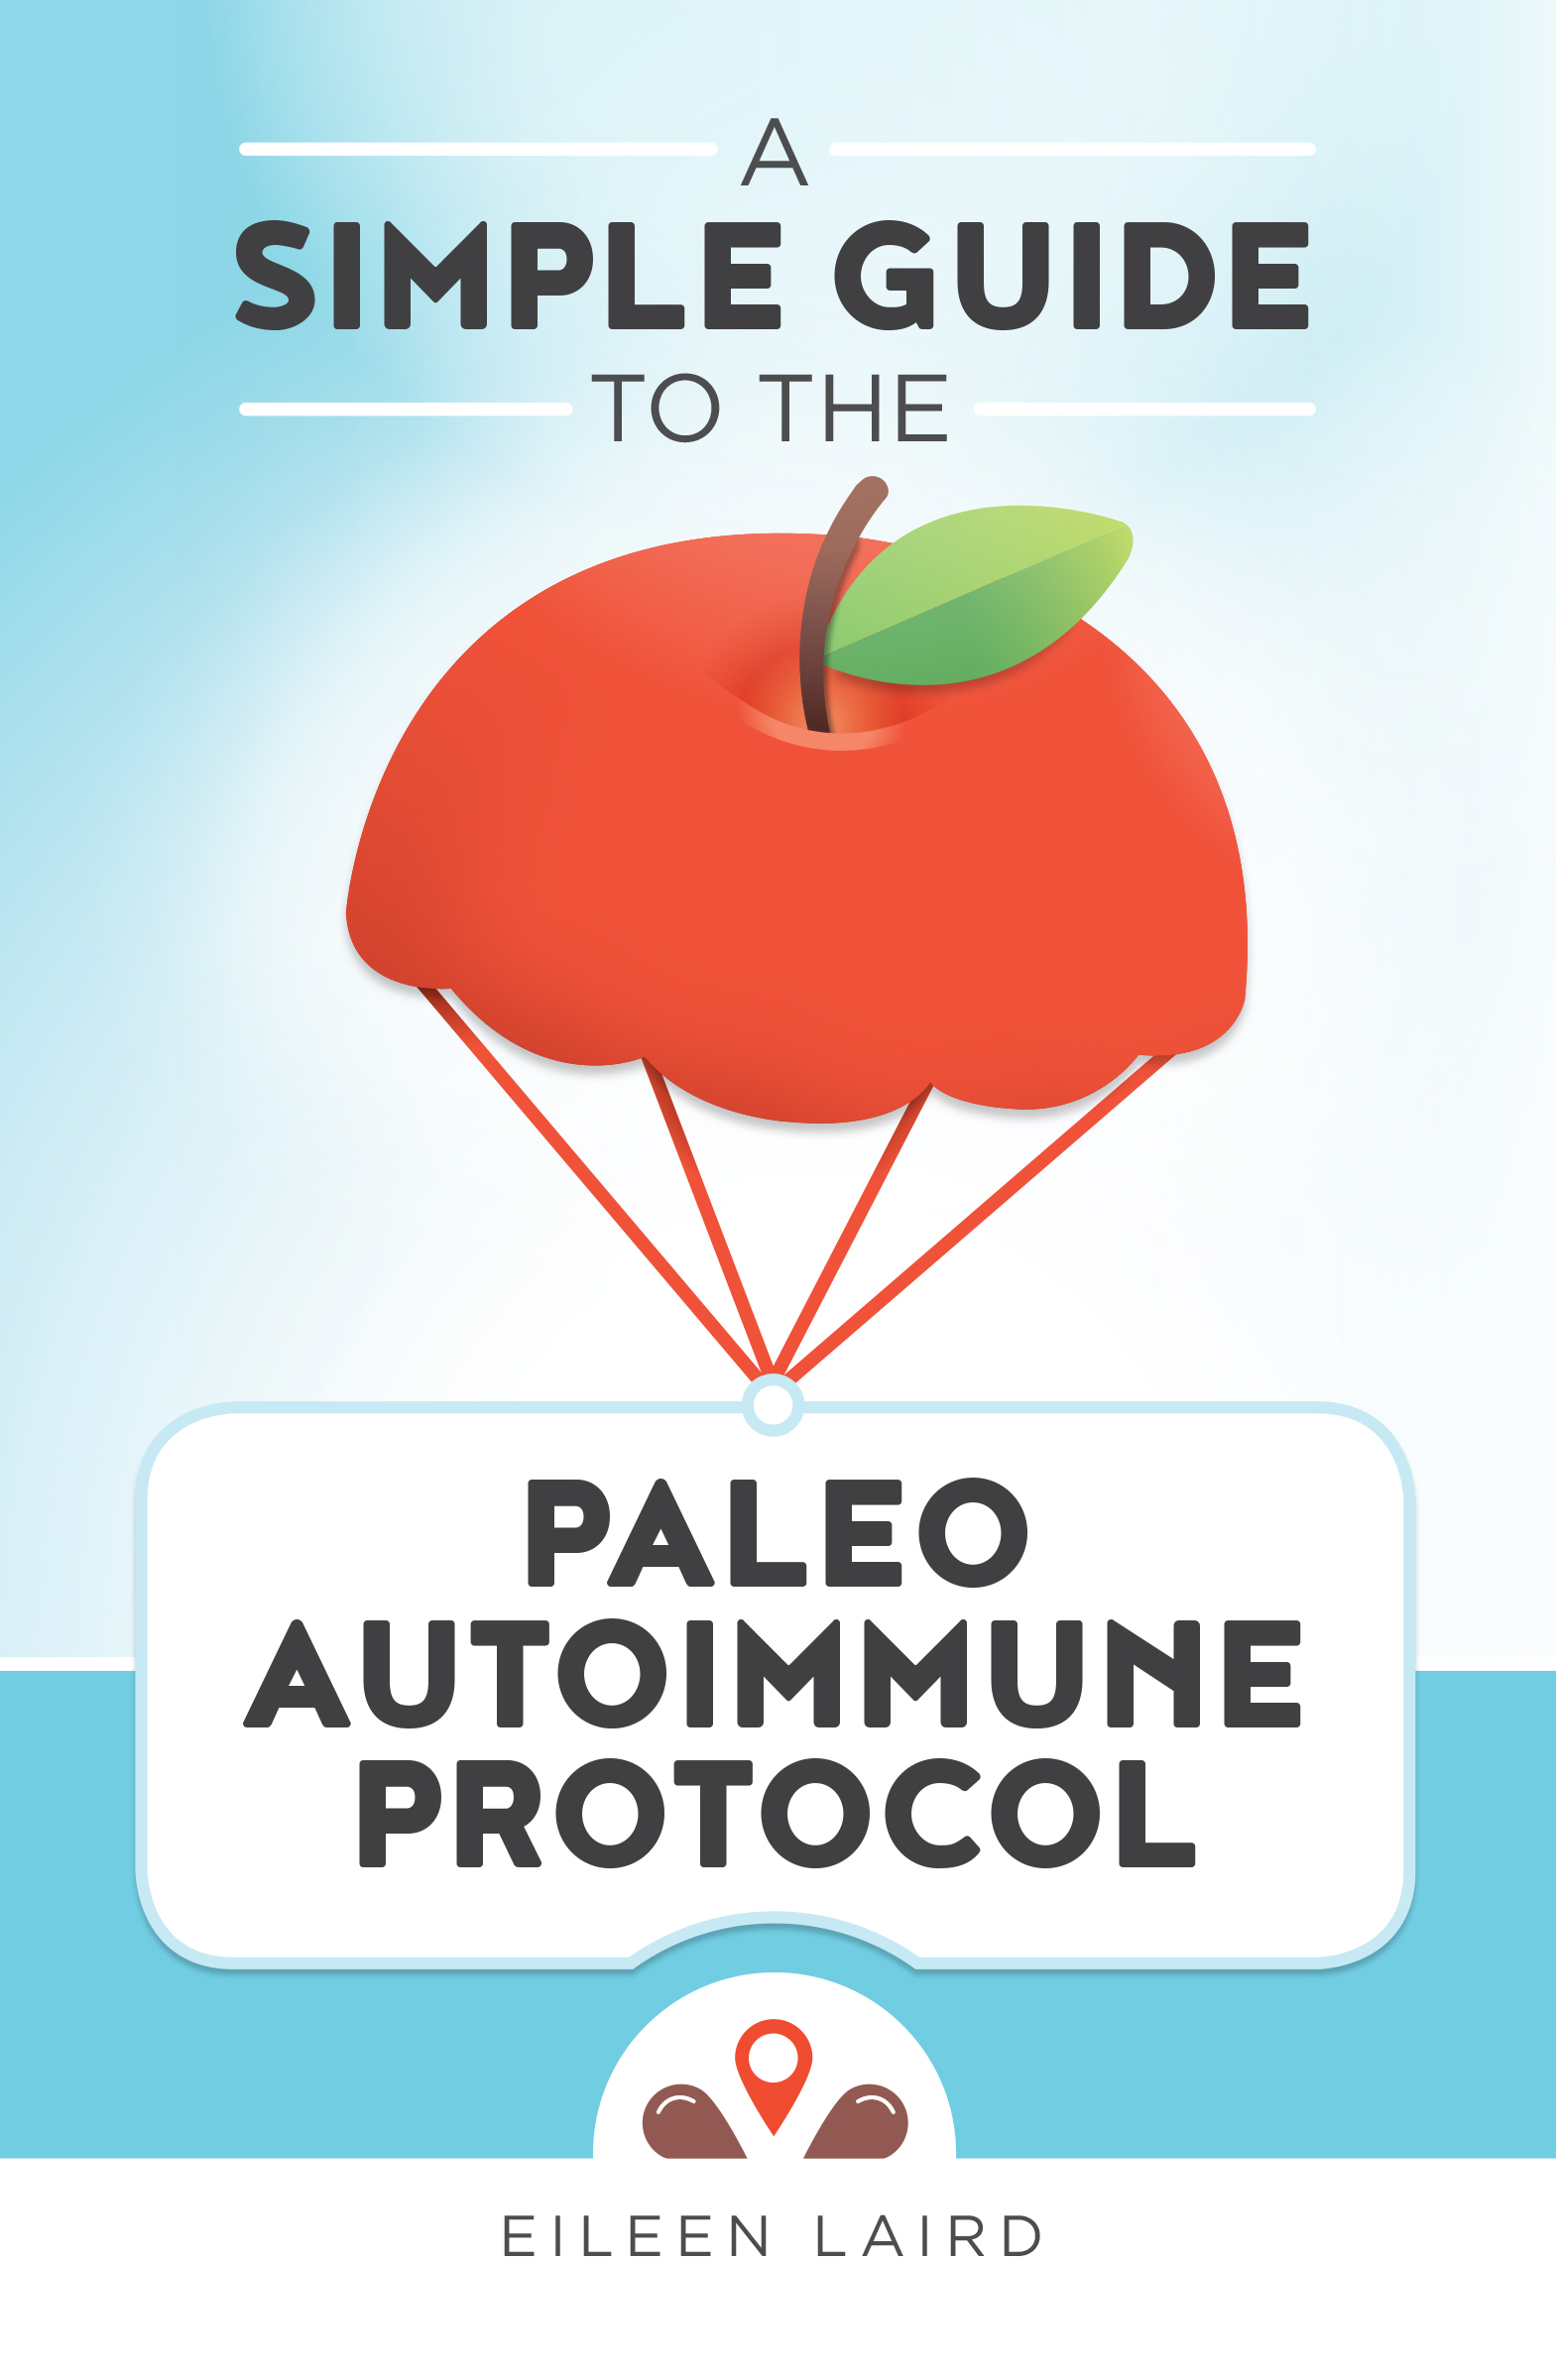 My New Book: A Simple Guide to the Paleo Autoimmune Protocol | Phoenix Helix